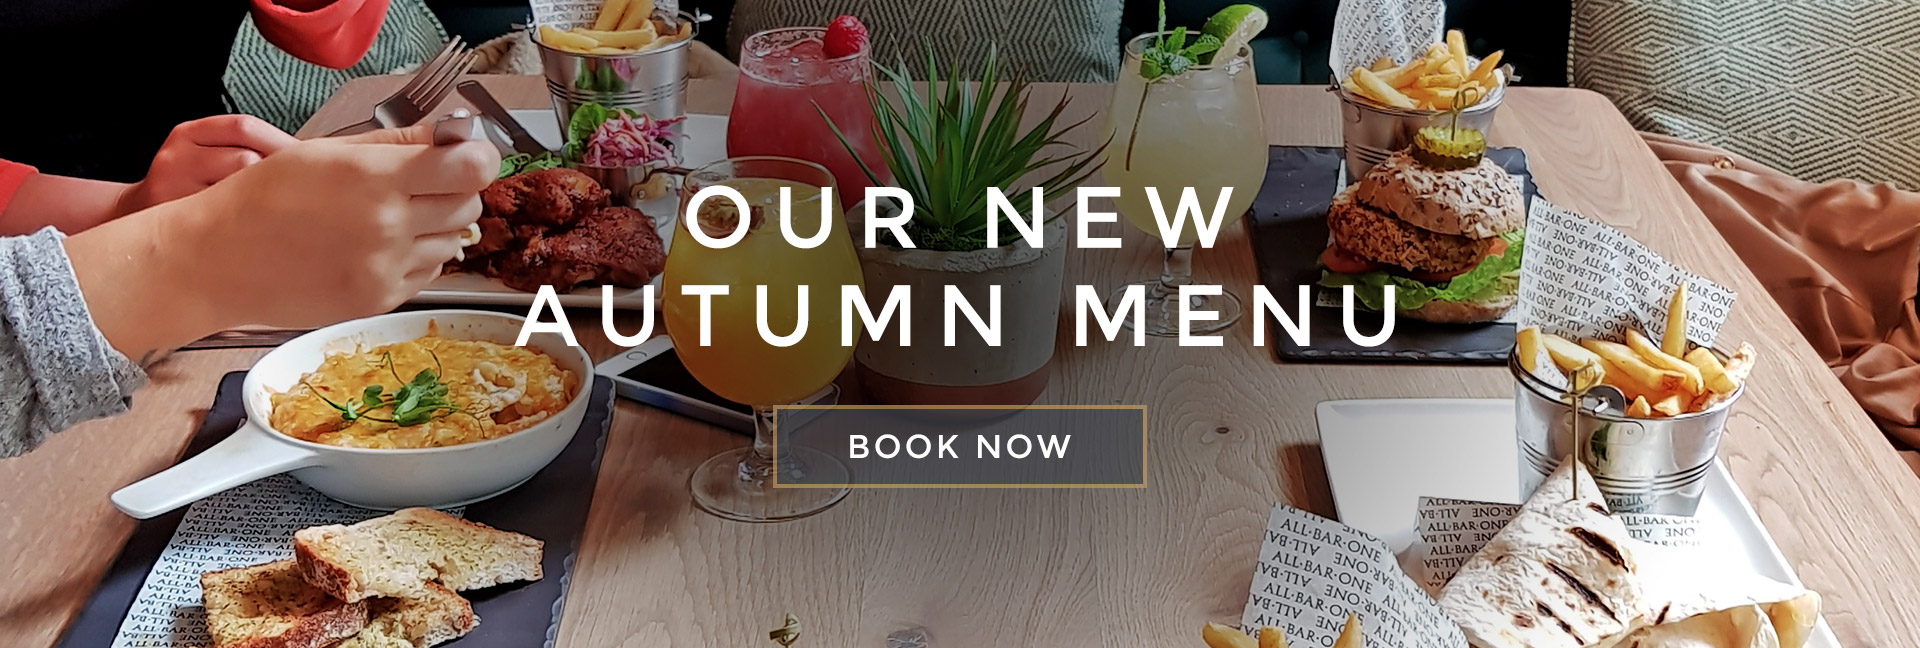 Our new Autumn menu at All Bar One Worcester - Book now